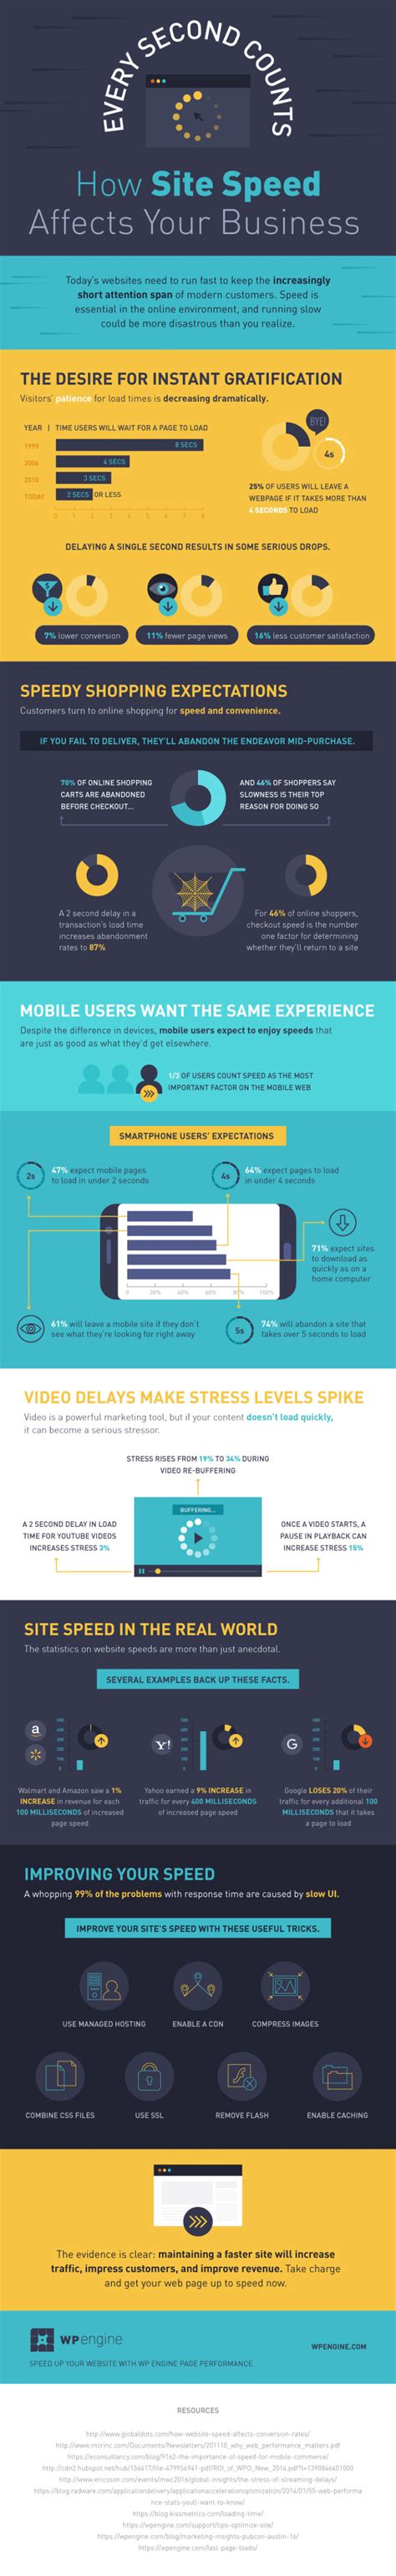 Why Site Speed Matters So Much - Infographic | Business infographic, Infographic, Cool websites